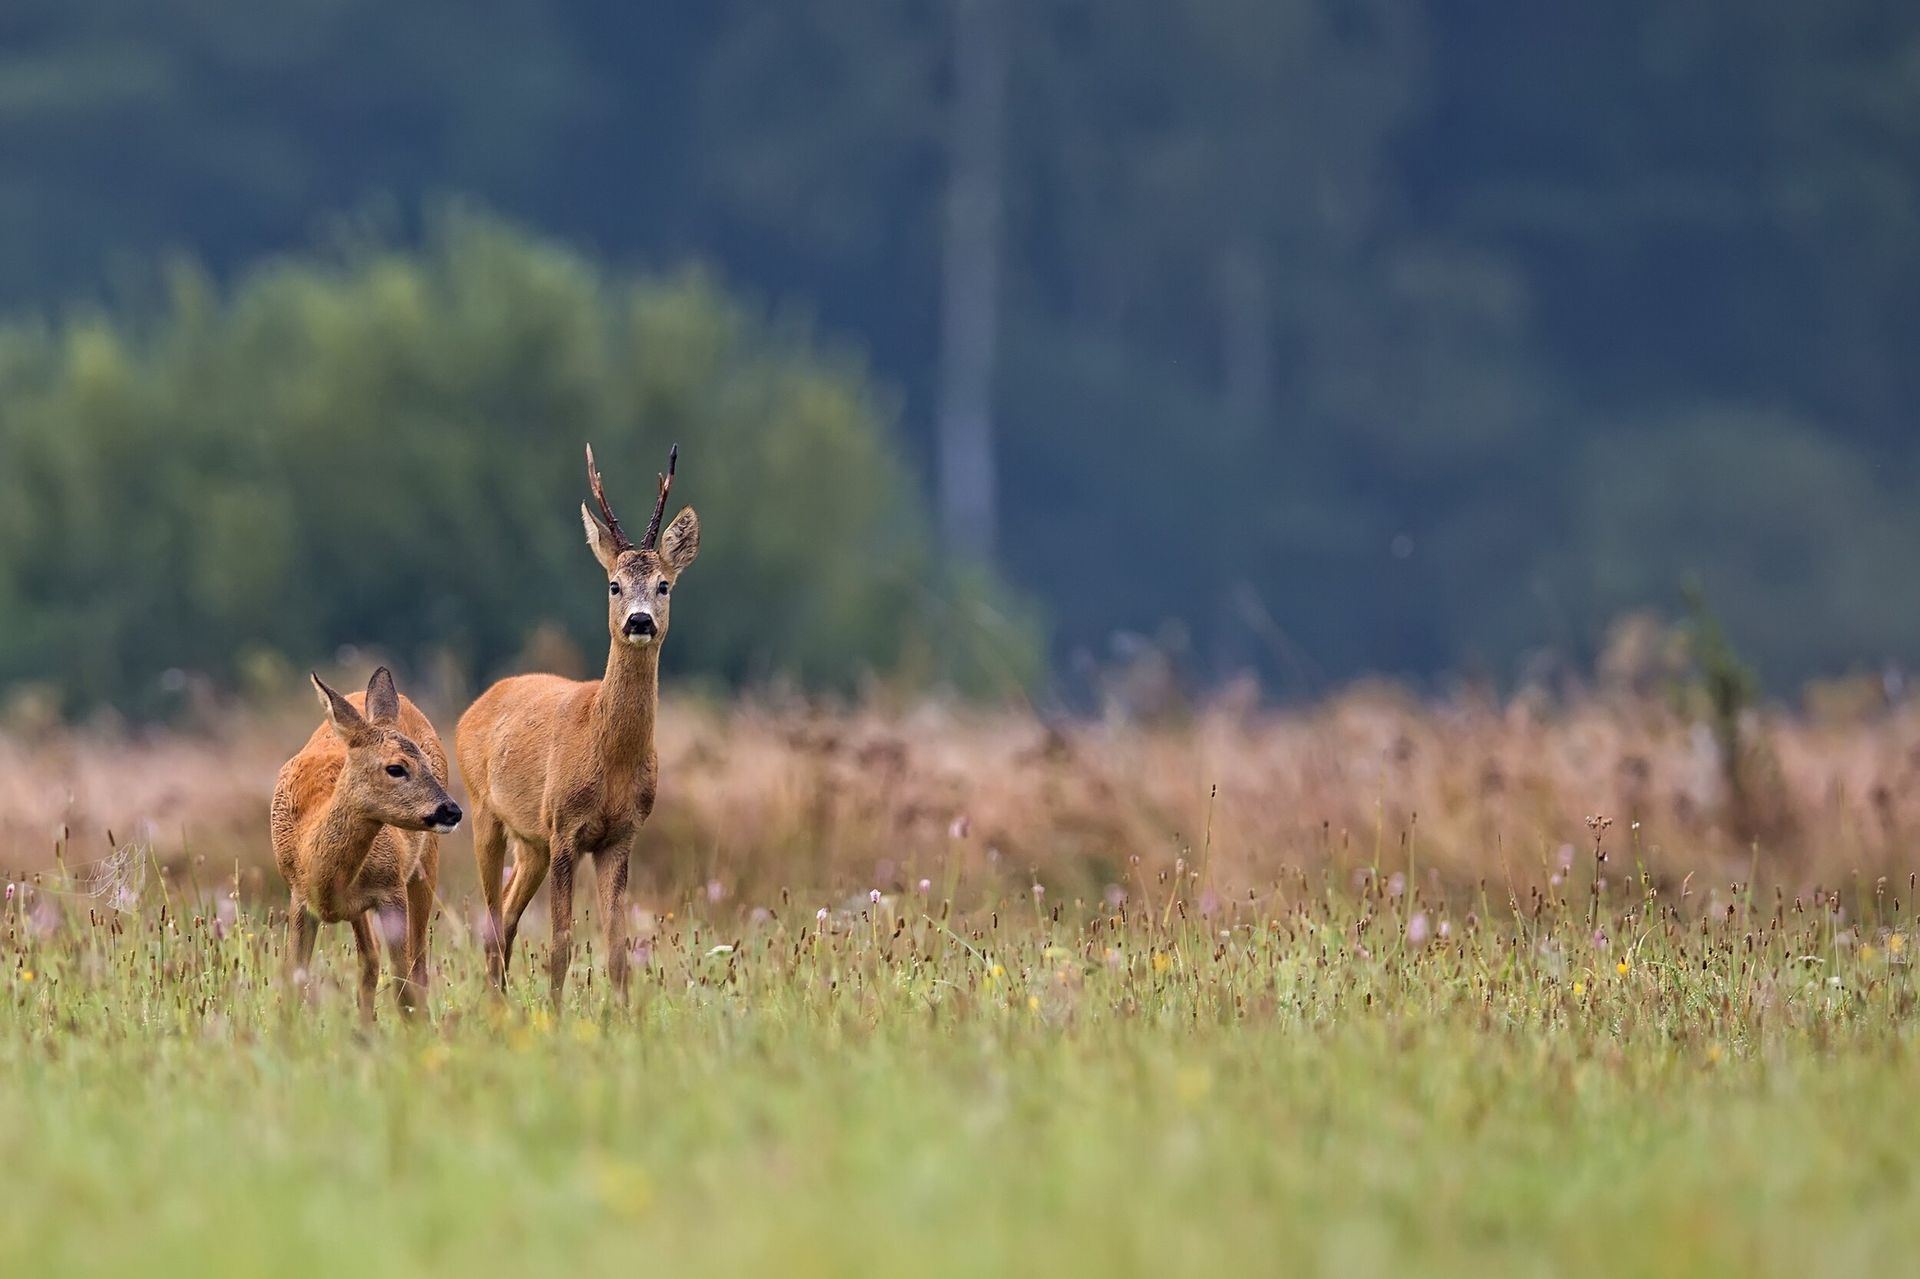 Two deer are standing in a field of tall grass.